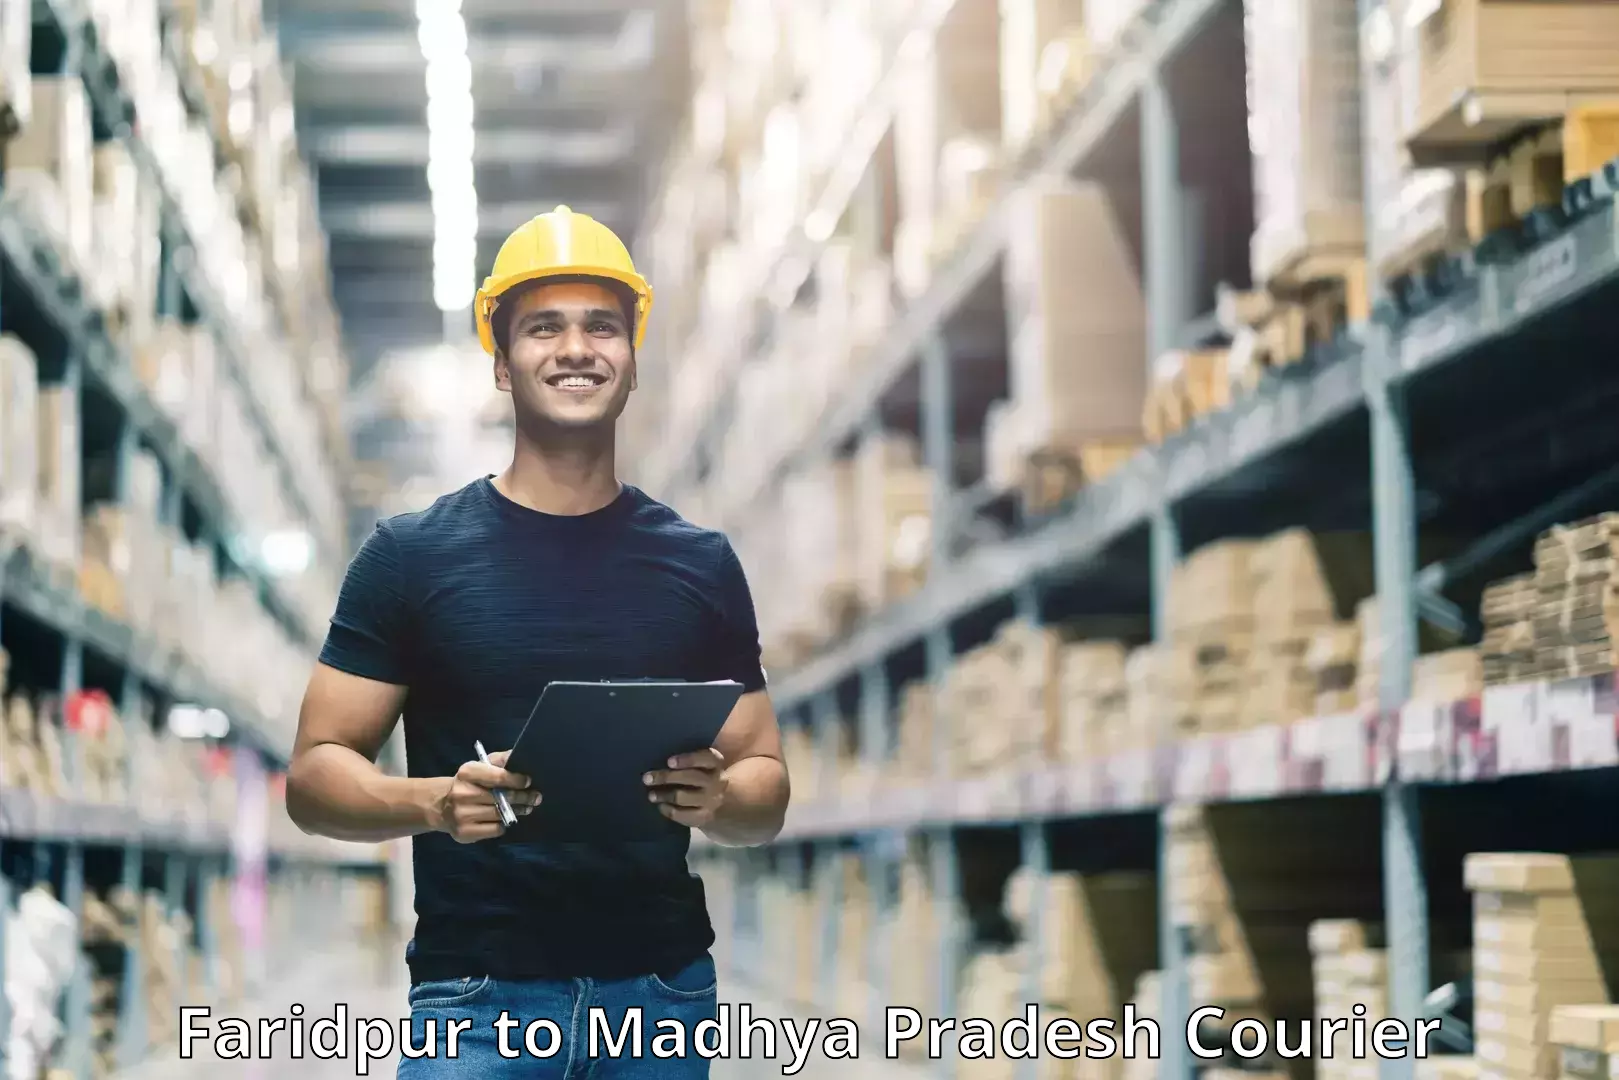 Specialized courier services Faridpur to Madhya Pradesh